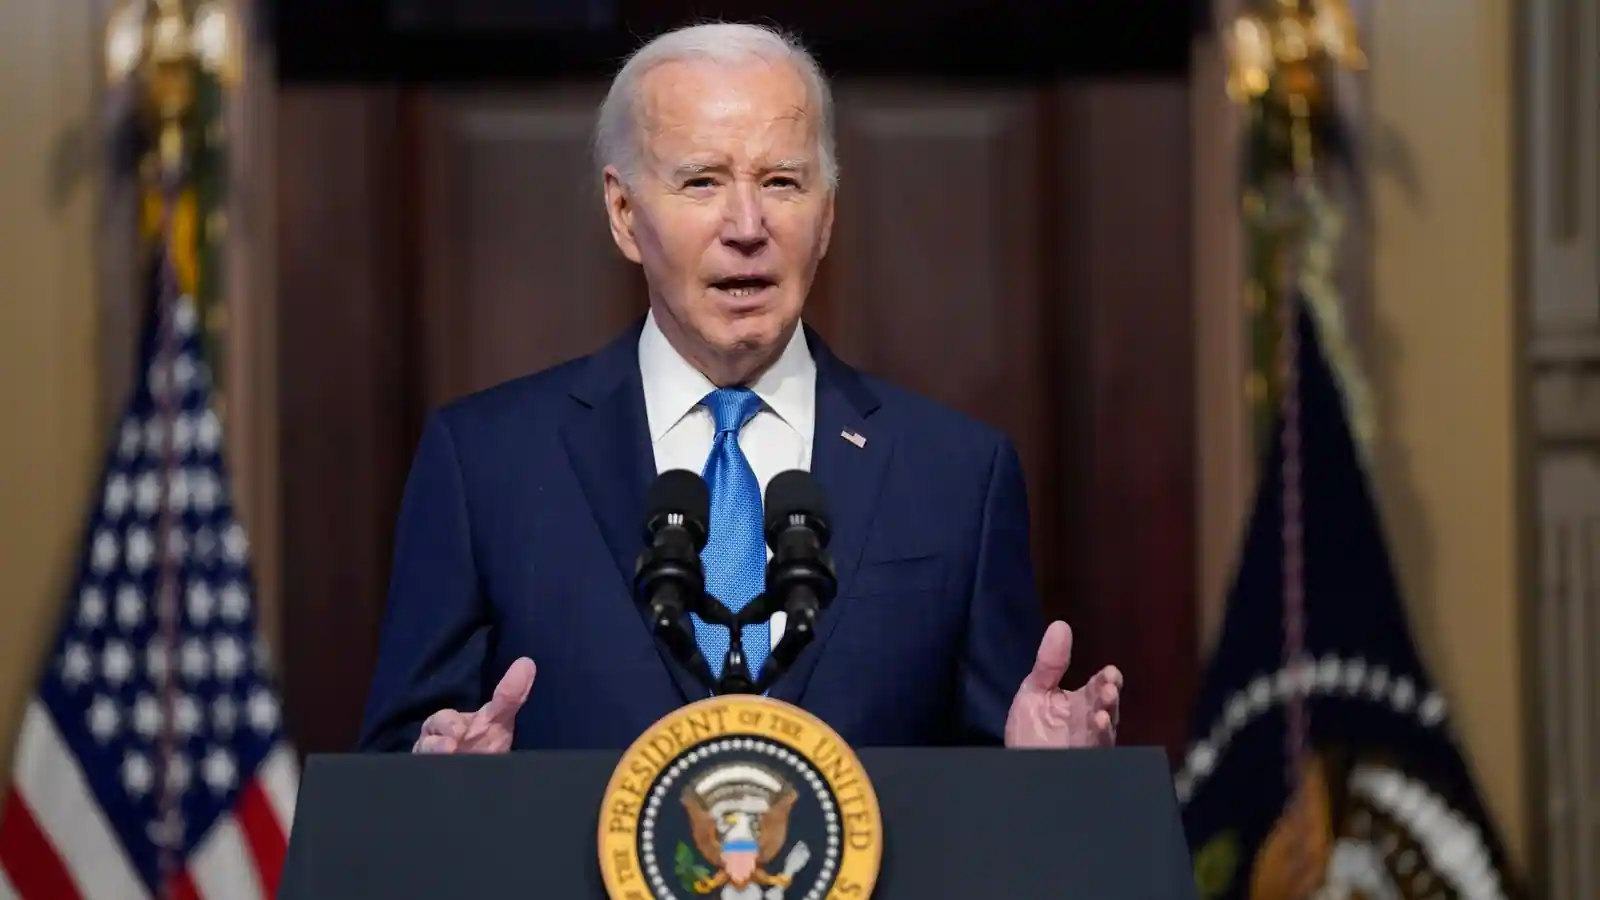 Biden welcomes agreement, urges swift congressional action (Credits: Hindustan Times)